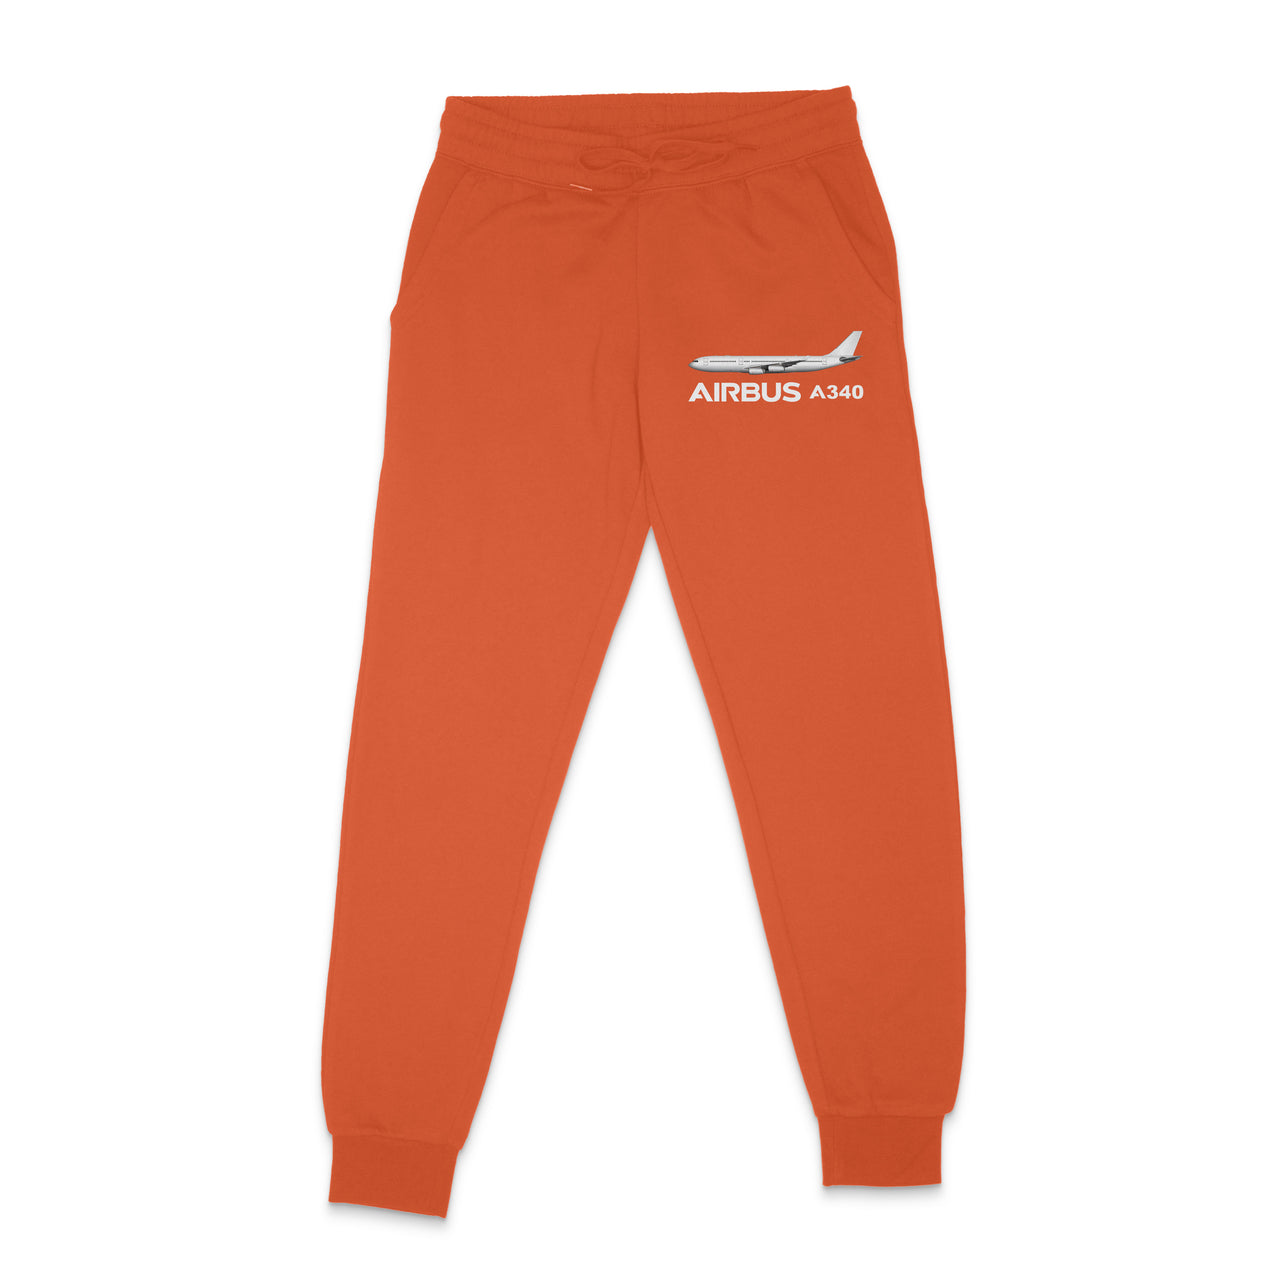 The Airbus A340 Designed Sweatpants